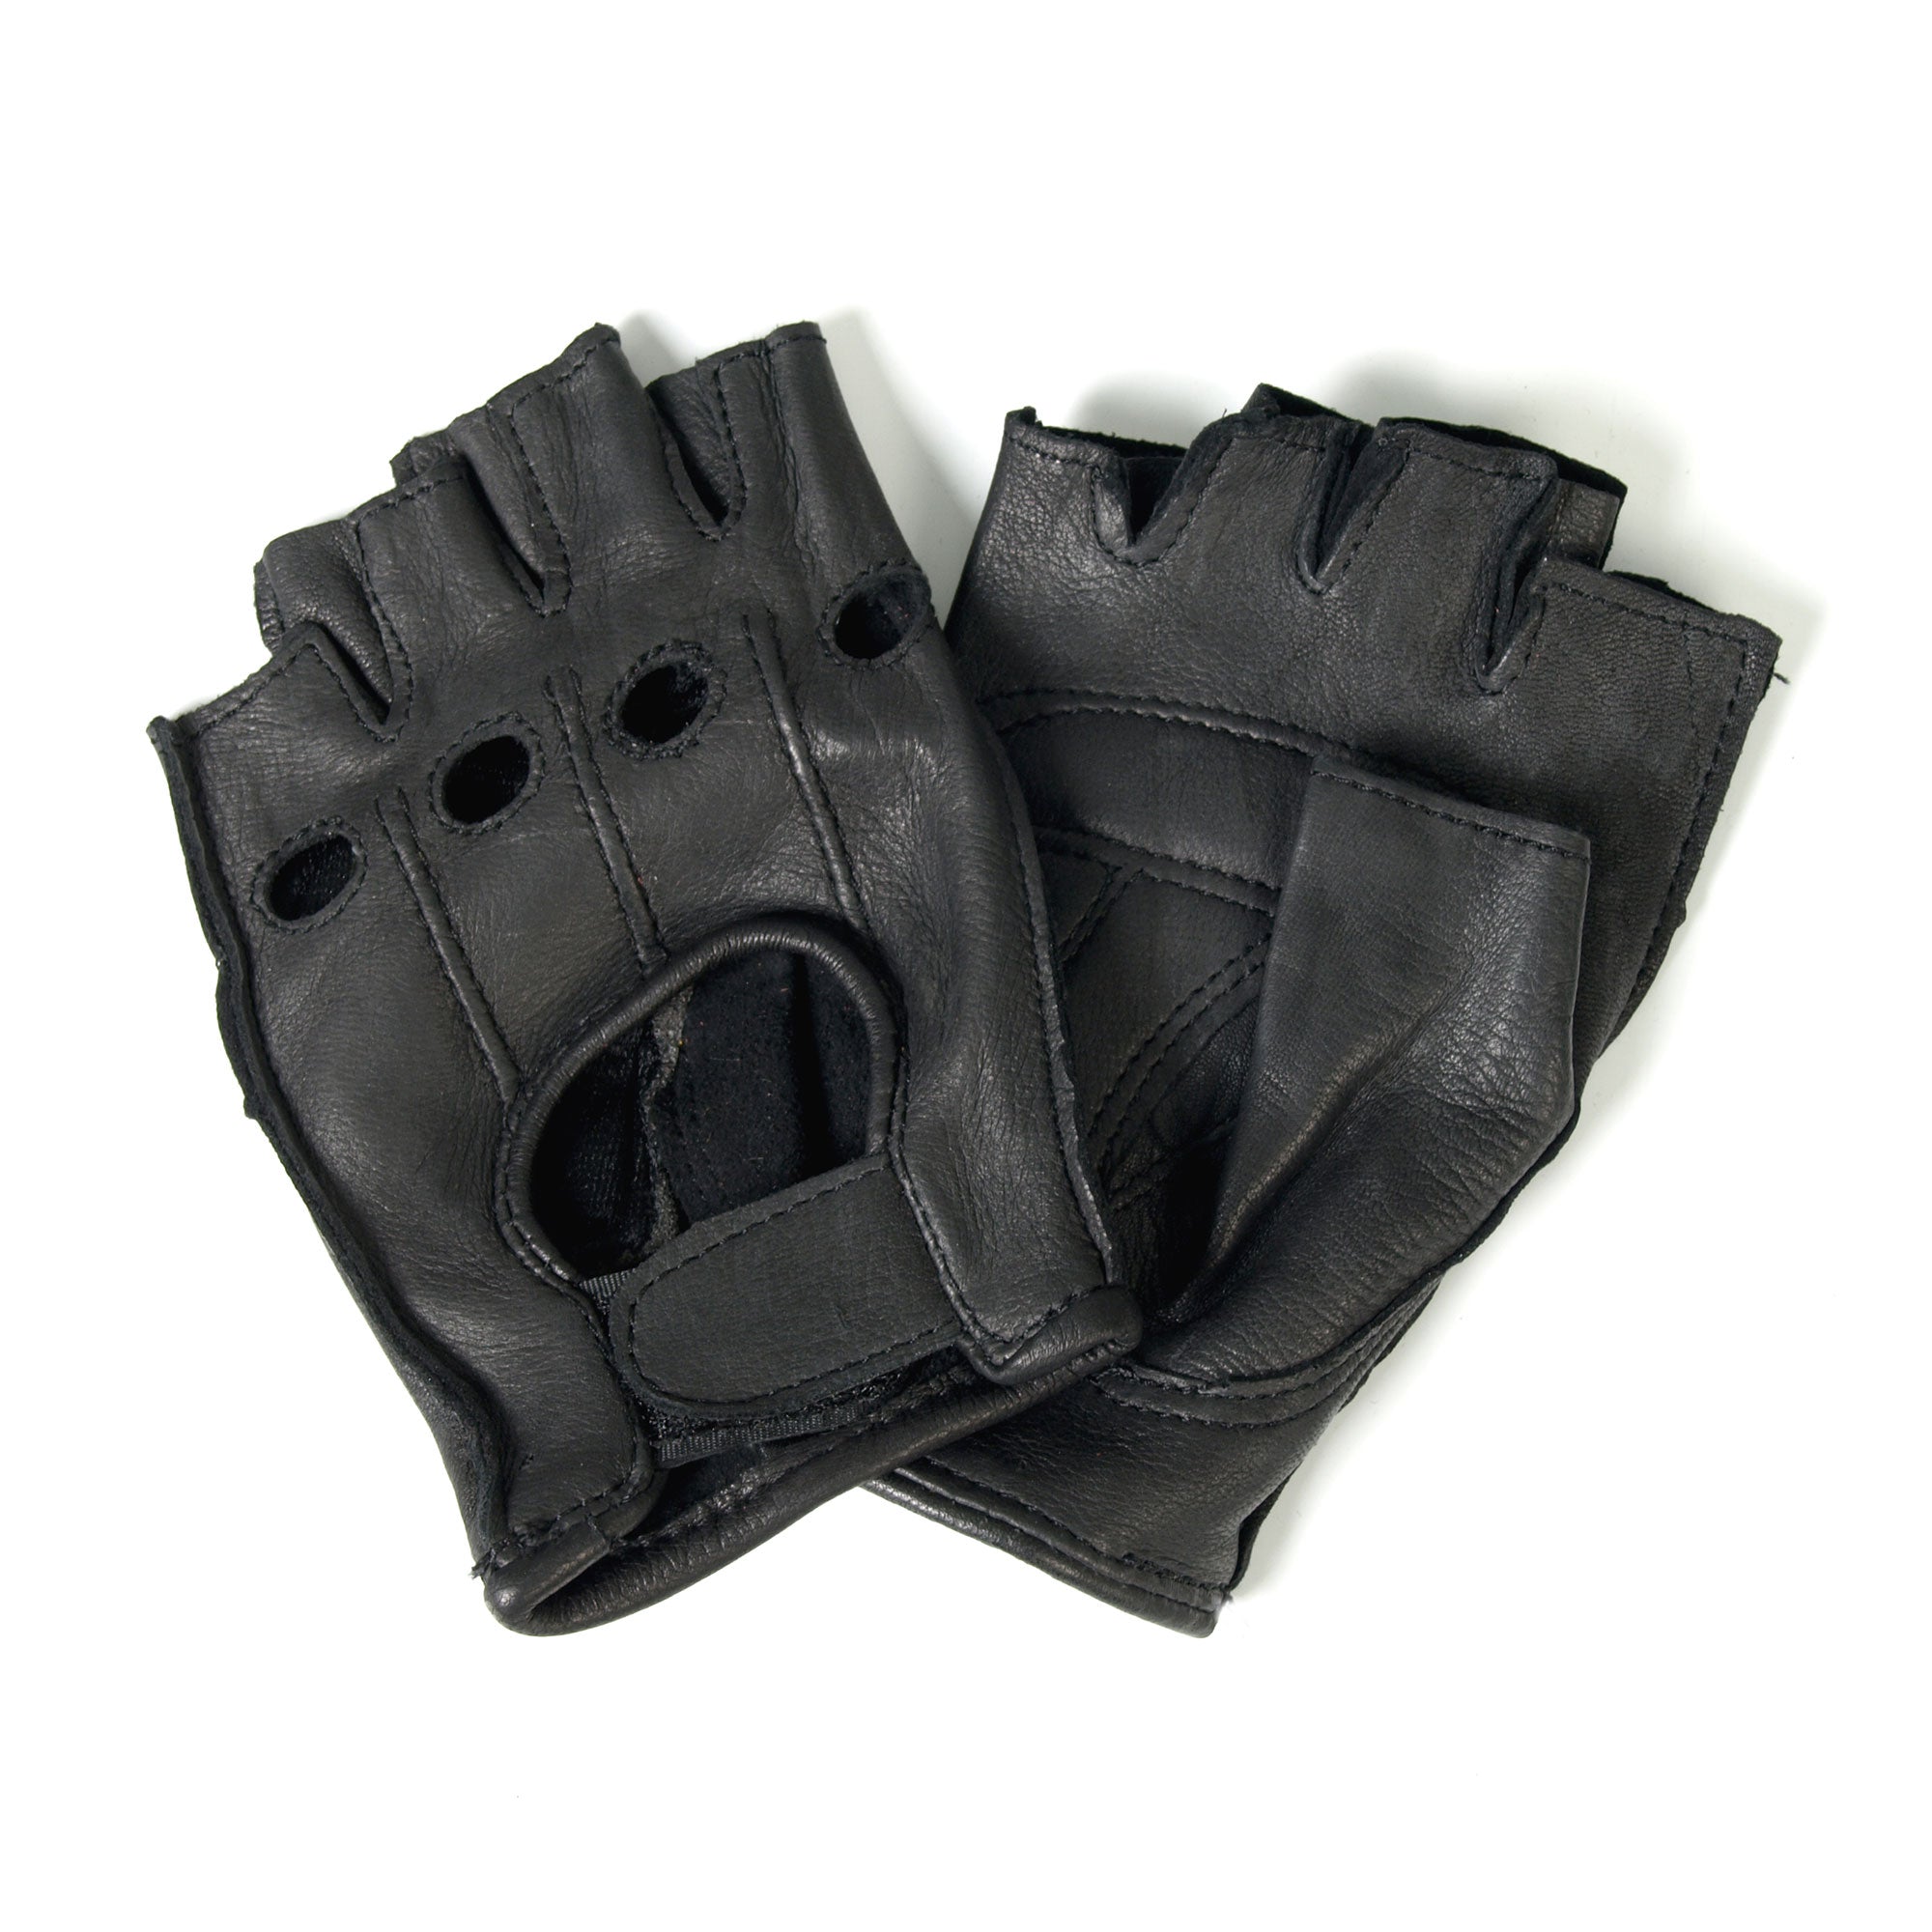 Motorcycle Riding Leather American Deer Skin Fingerless Gloves Very Soft Leather (M Regular)